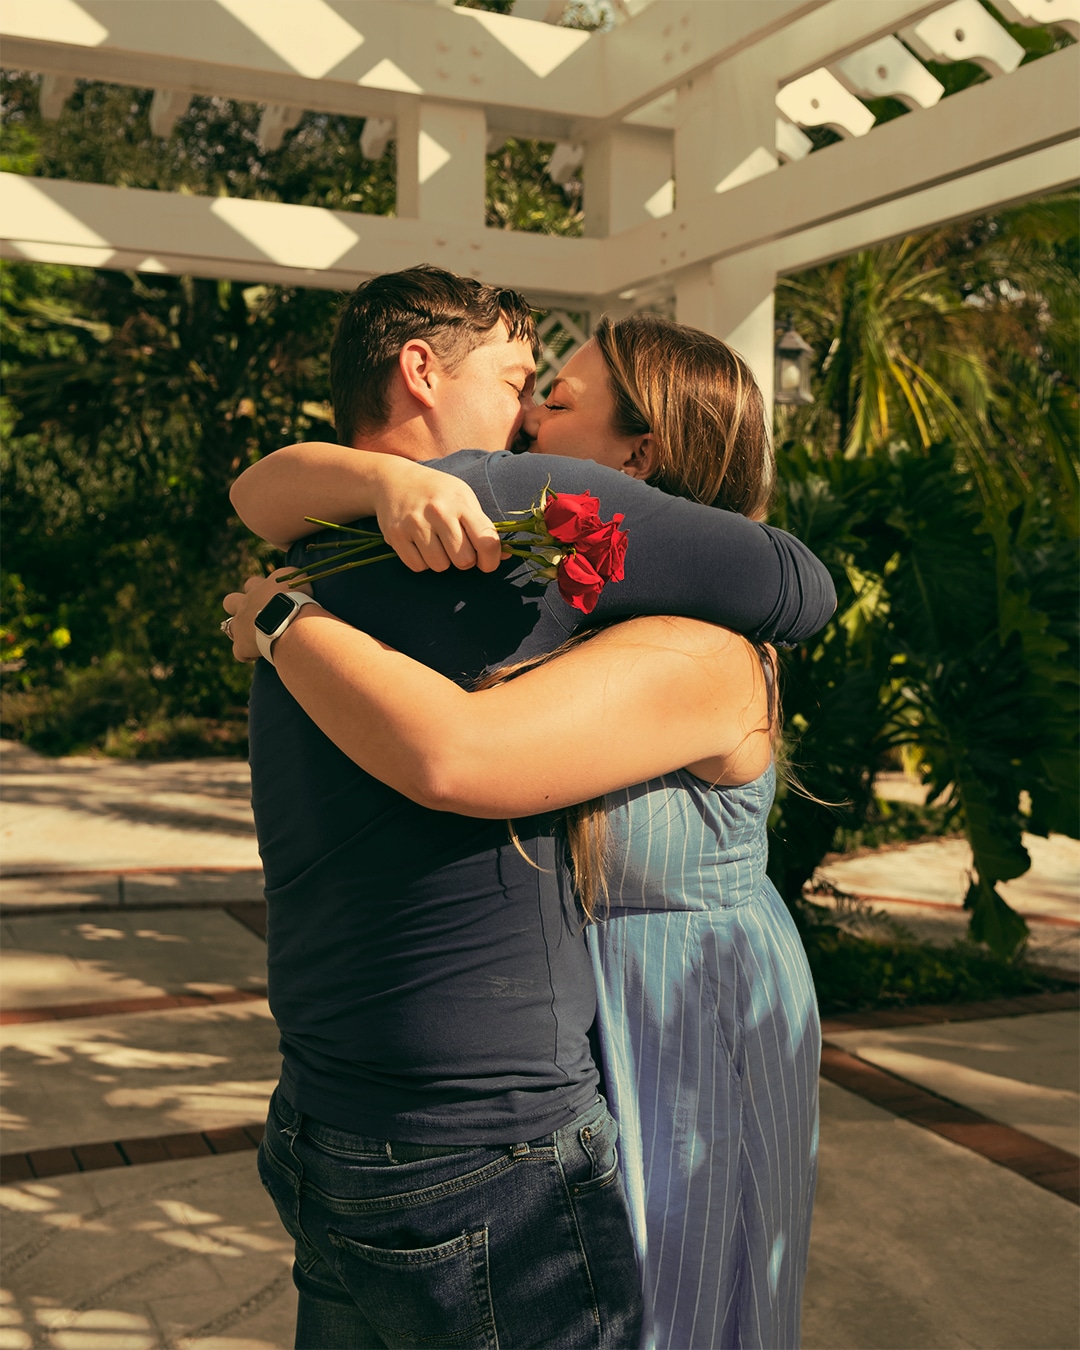 man and woman hug while woman holds red flowers under white gazebo type structure outside in garden